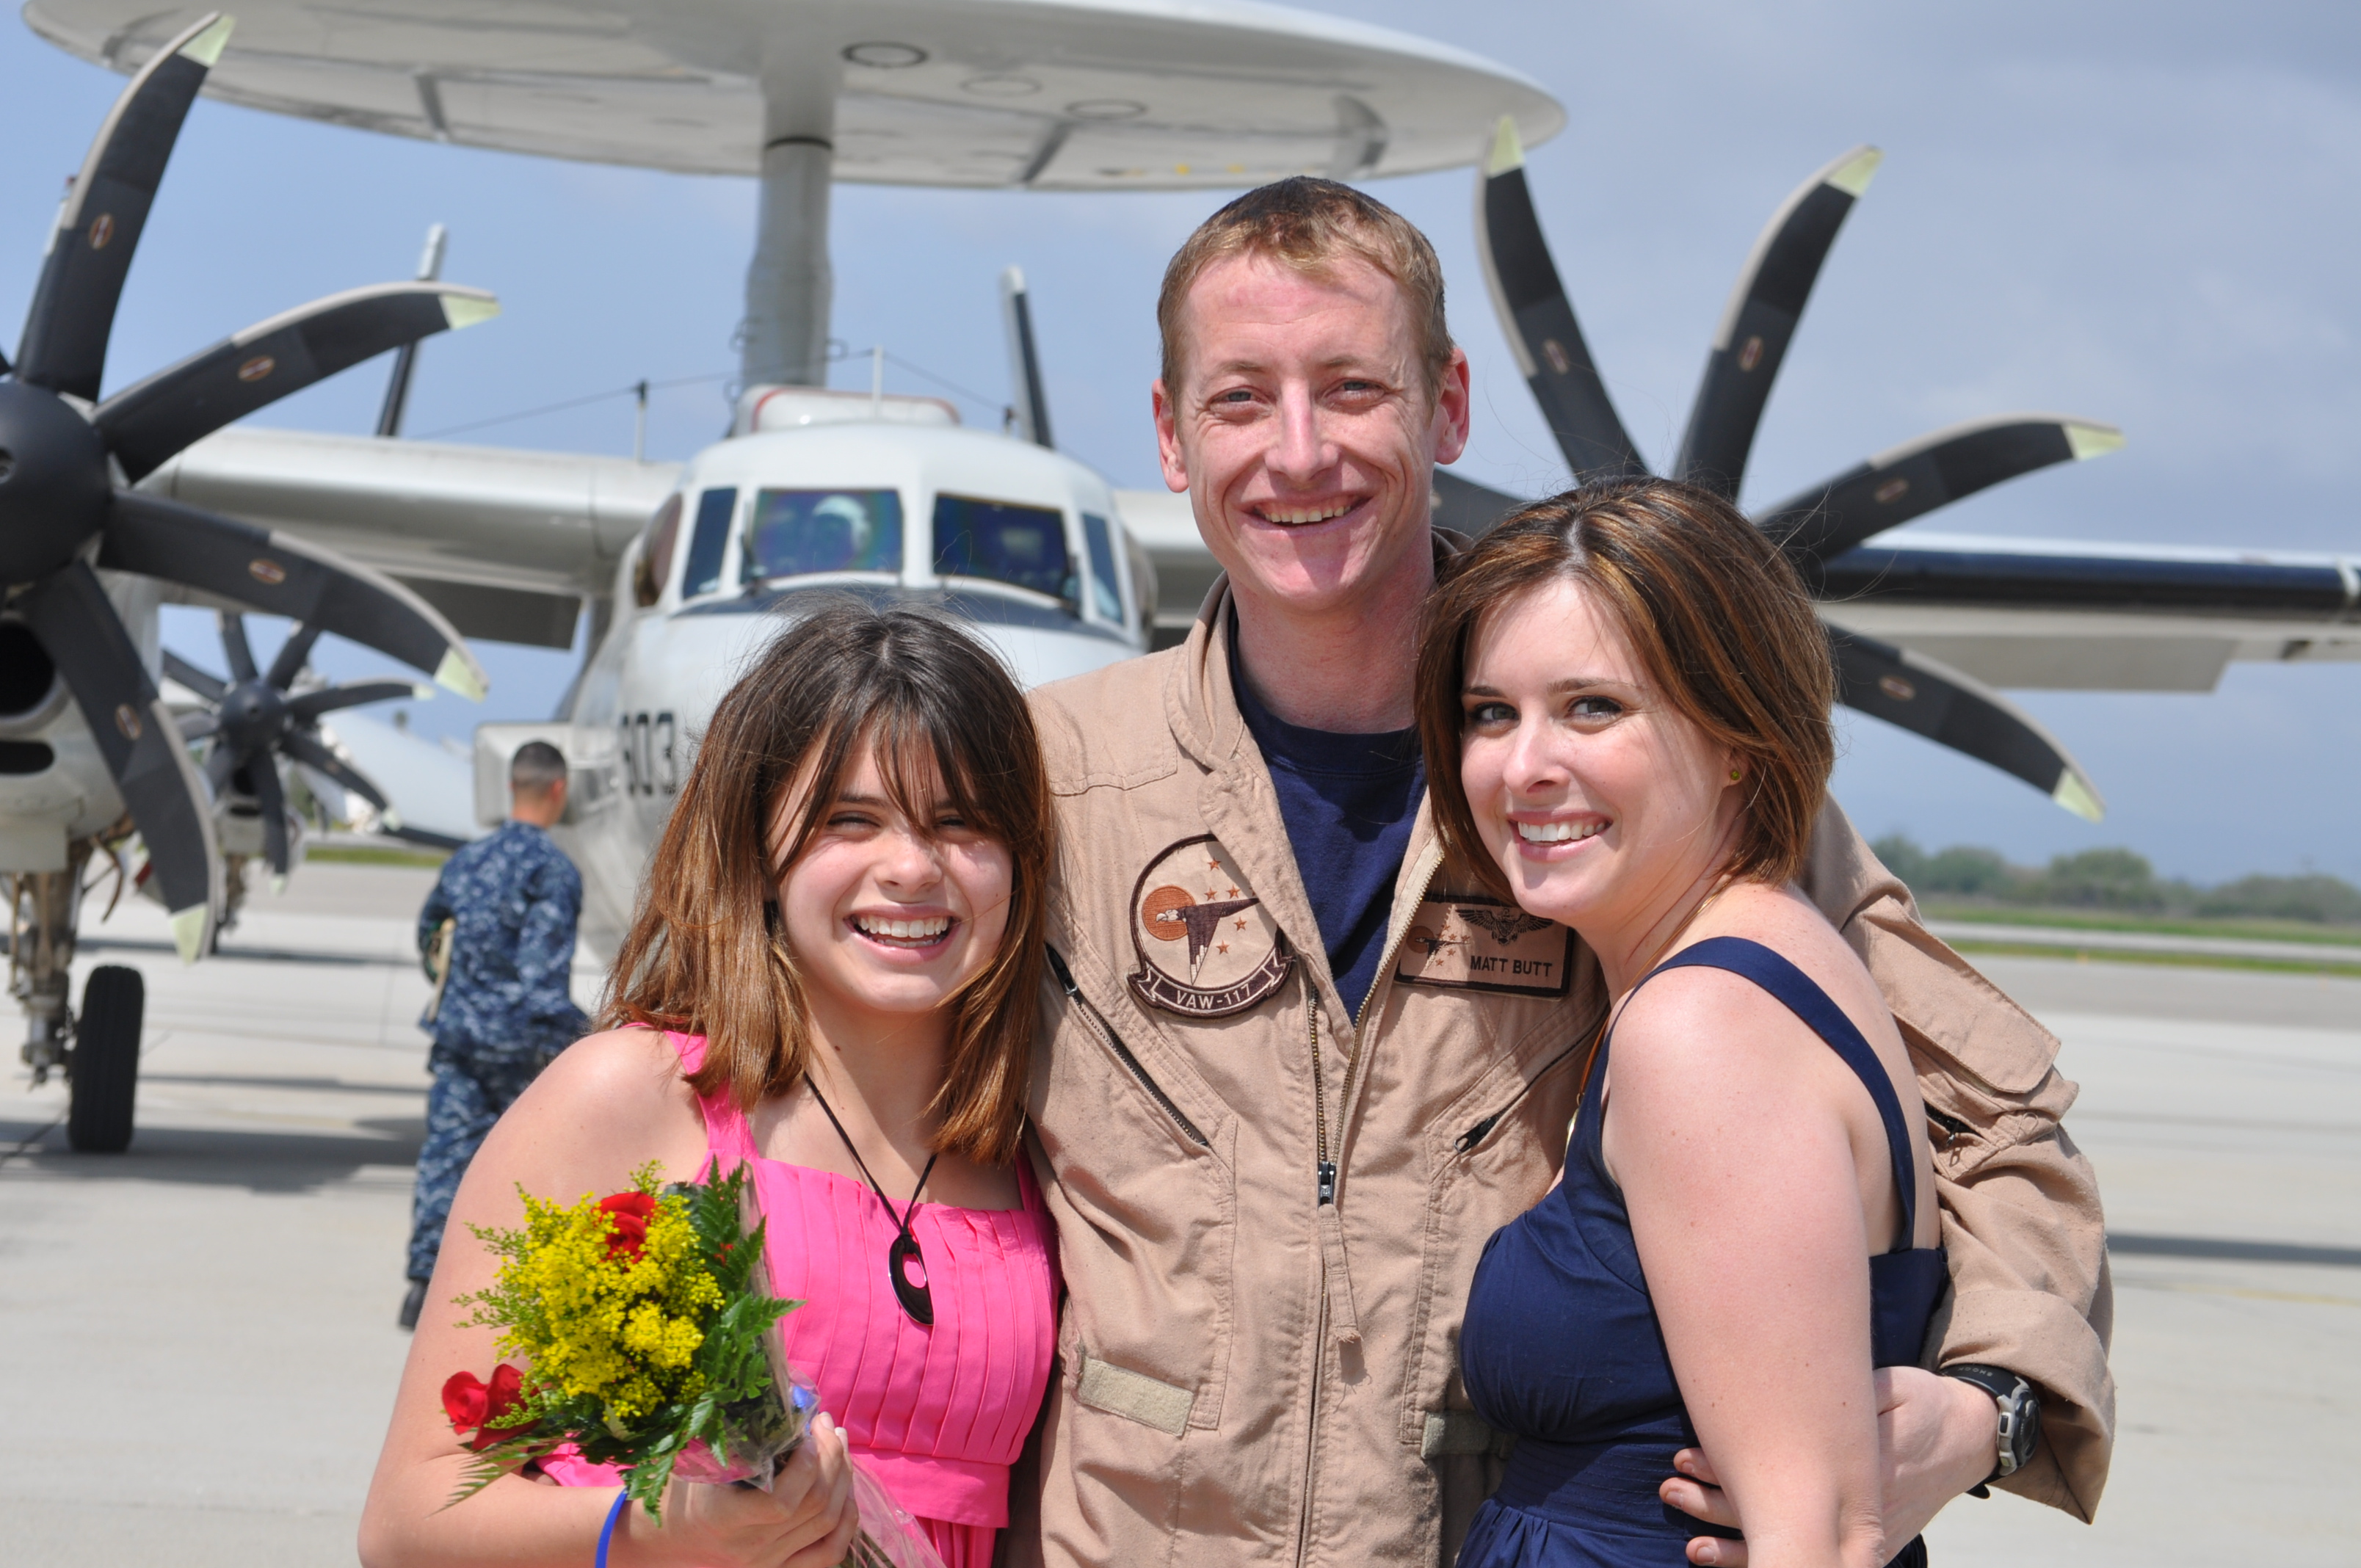 Lt. Cmdr. Matthew Butt, U.S. Navy, Virginia Tech Corps of Cadets Class of 2003, center, with his family.